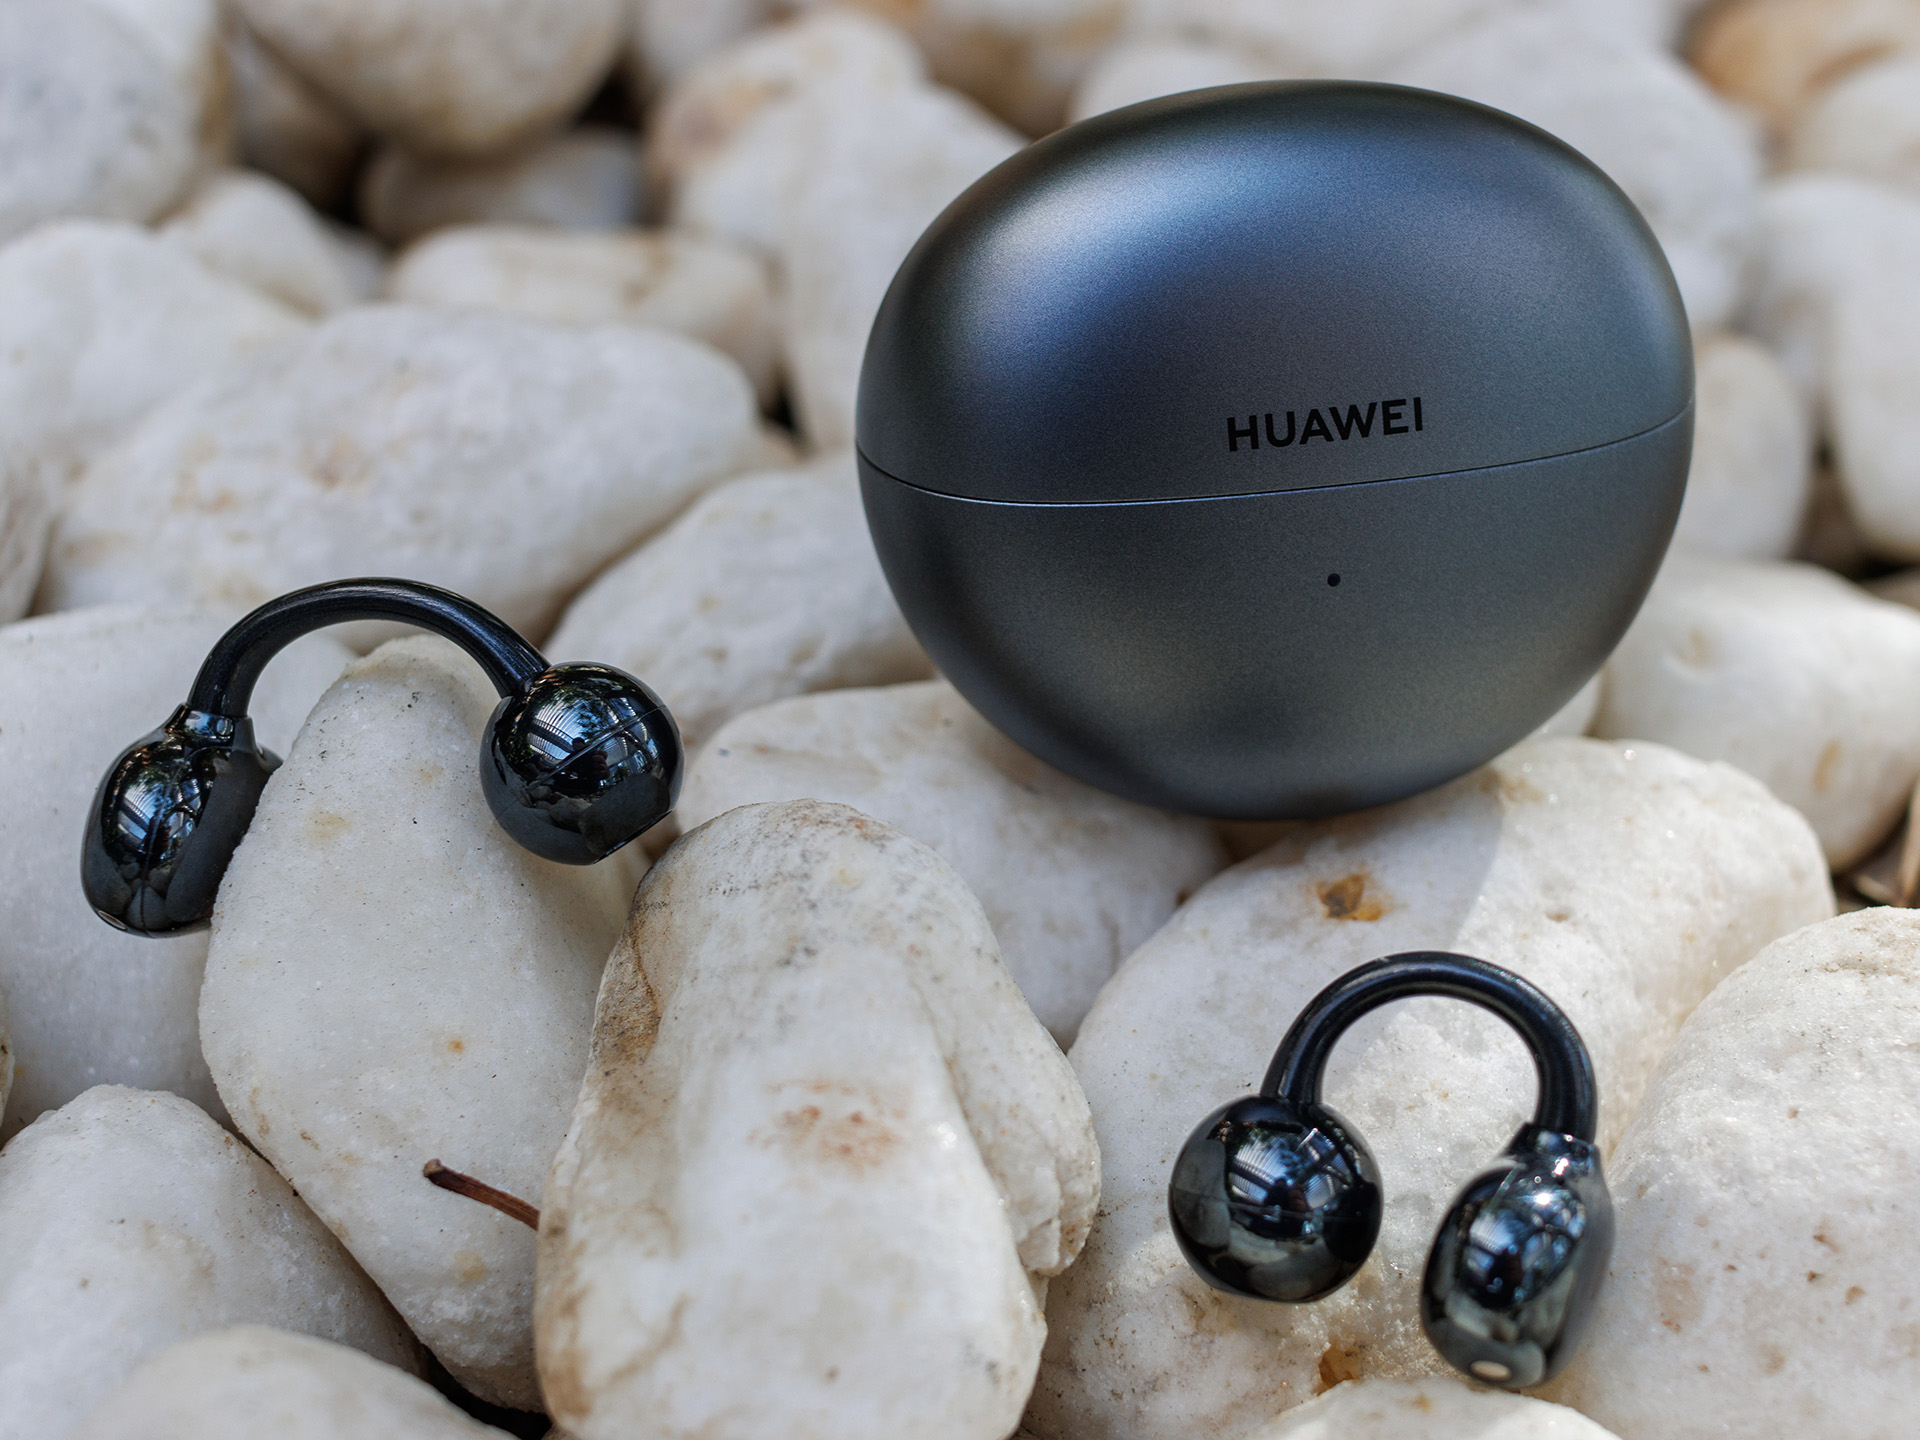 Huawei FreeClip review - Open-ear headphones with an innovative design -   Reviews